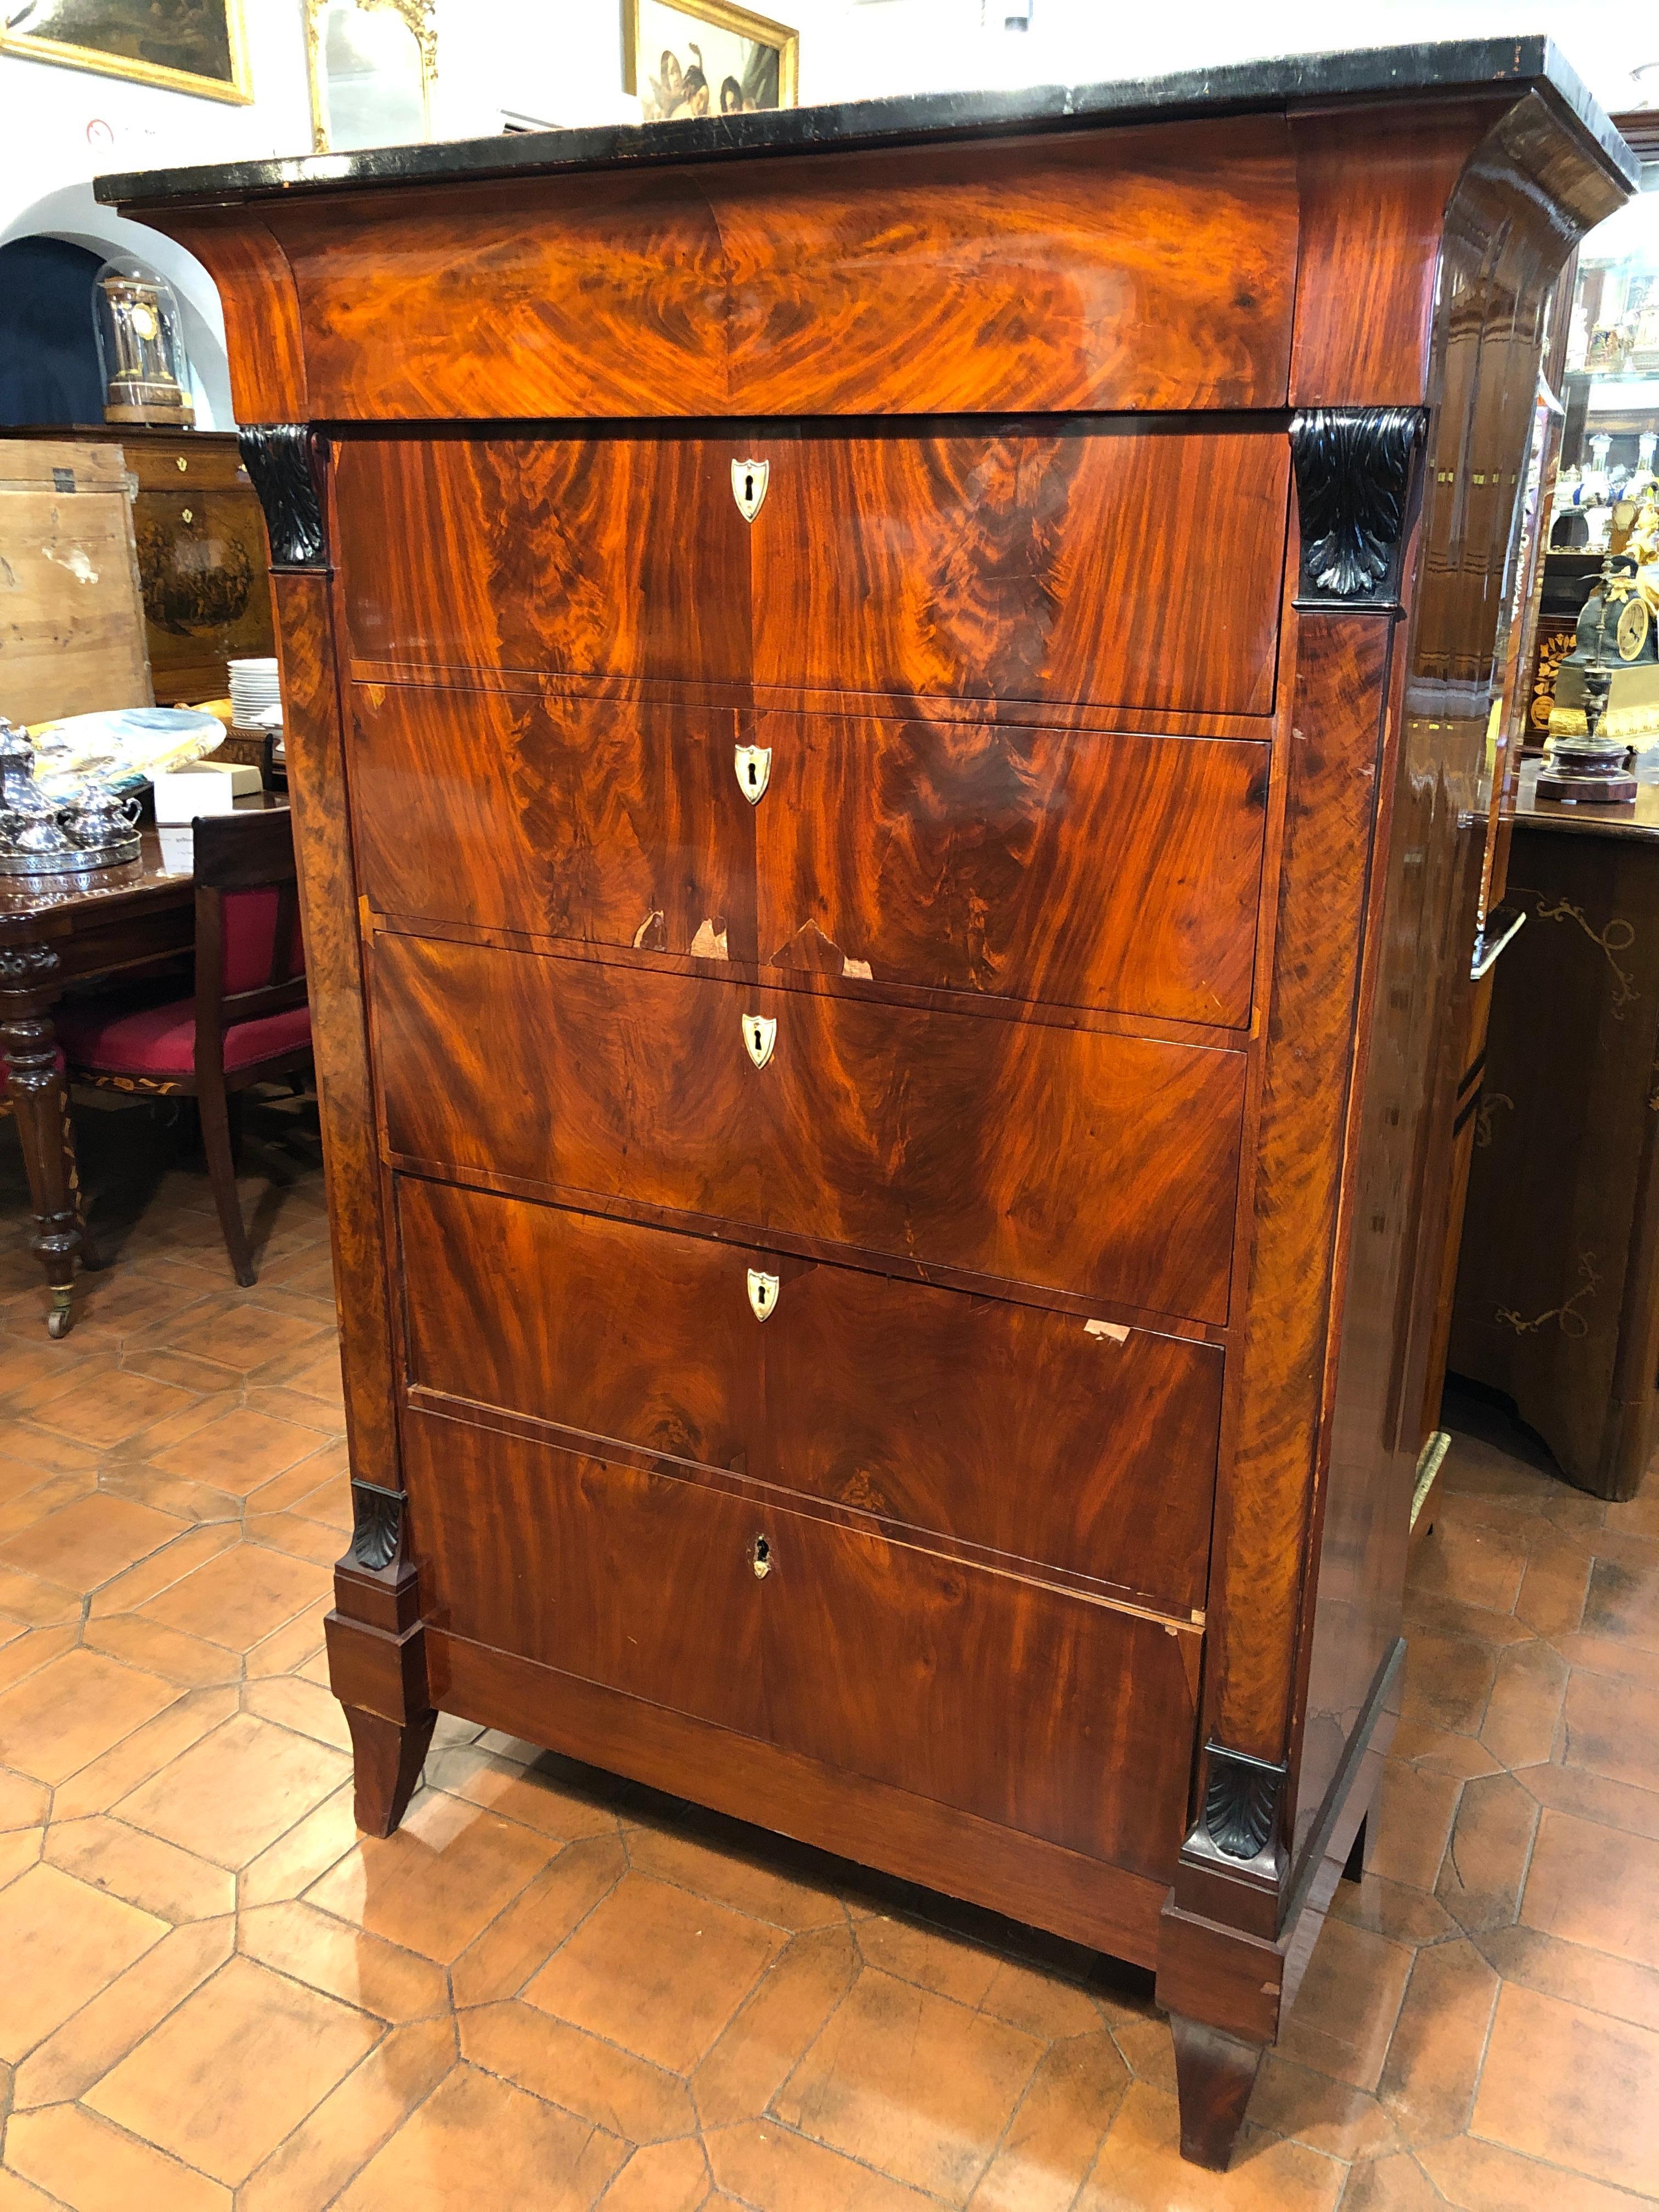 Imposing German tallboy, linear shapes, embellished with capitals, on columns, ebonized. In full Biedermeier style both as lines and as epoch, it has the upper part flared and moved, also with the ebonized edge. Beautiful quality figured mahogany.